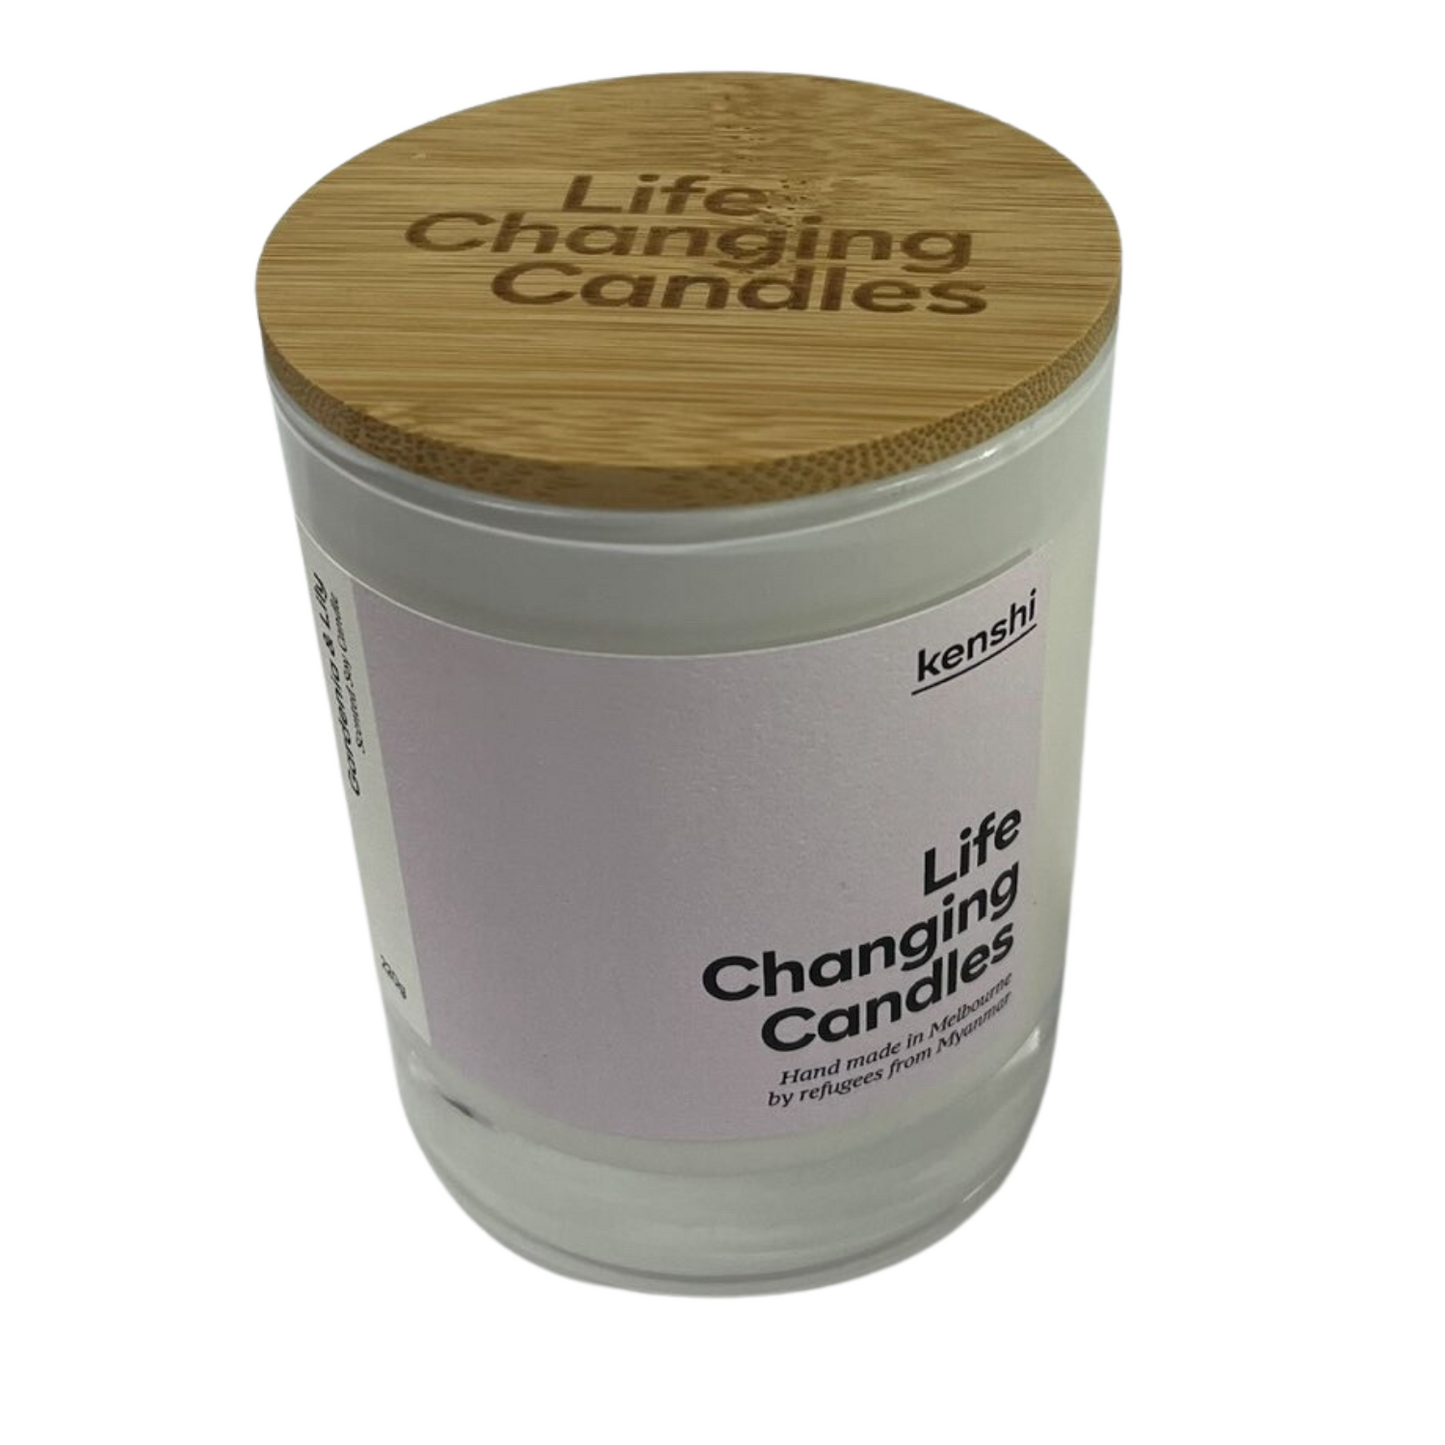 Medium size candle 220g for Dougies